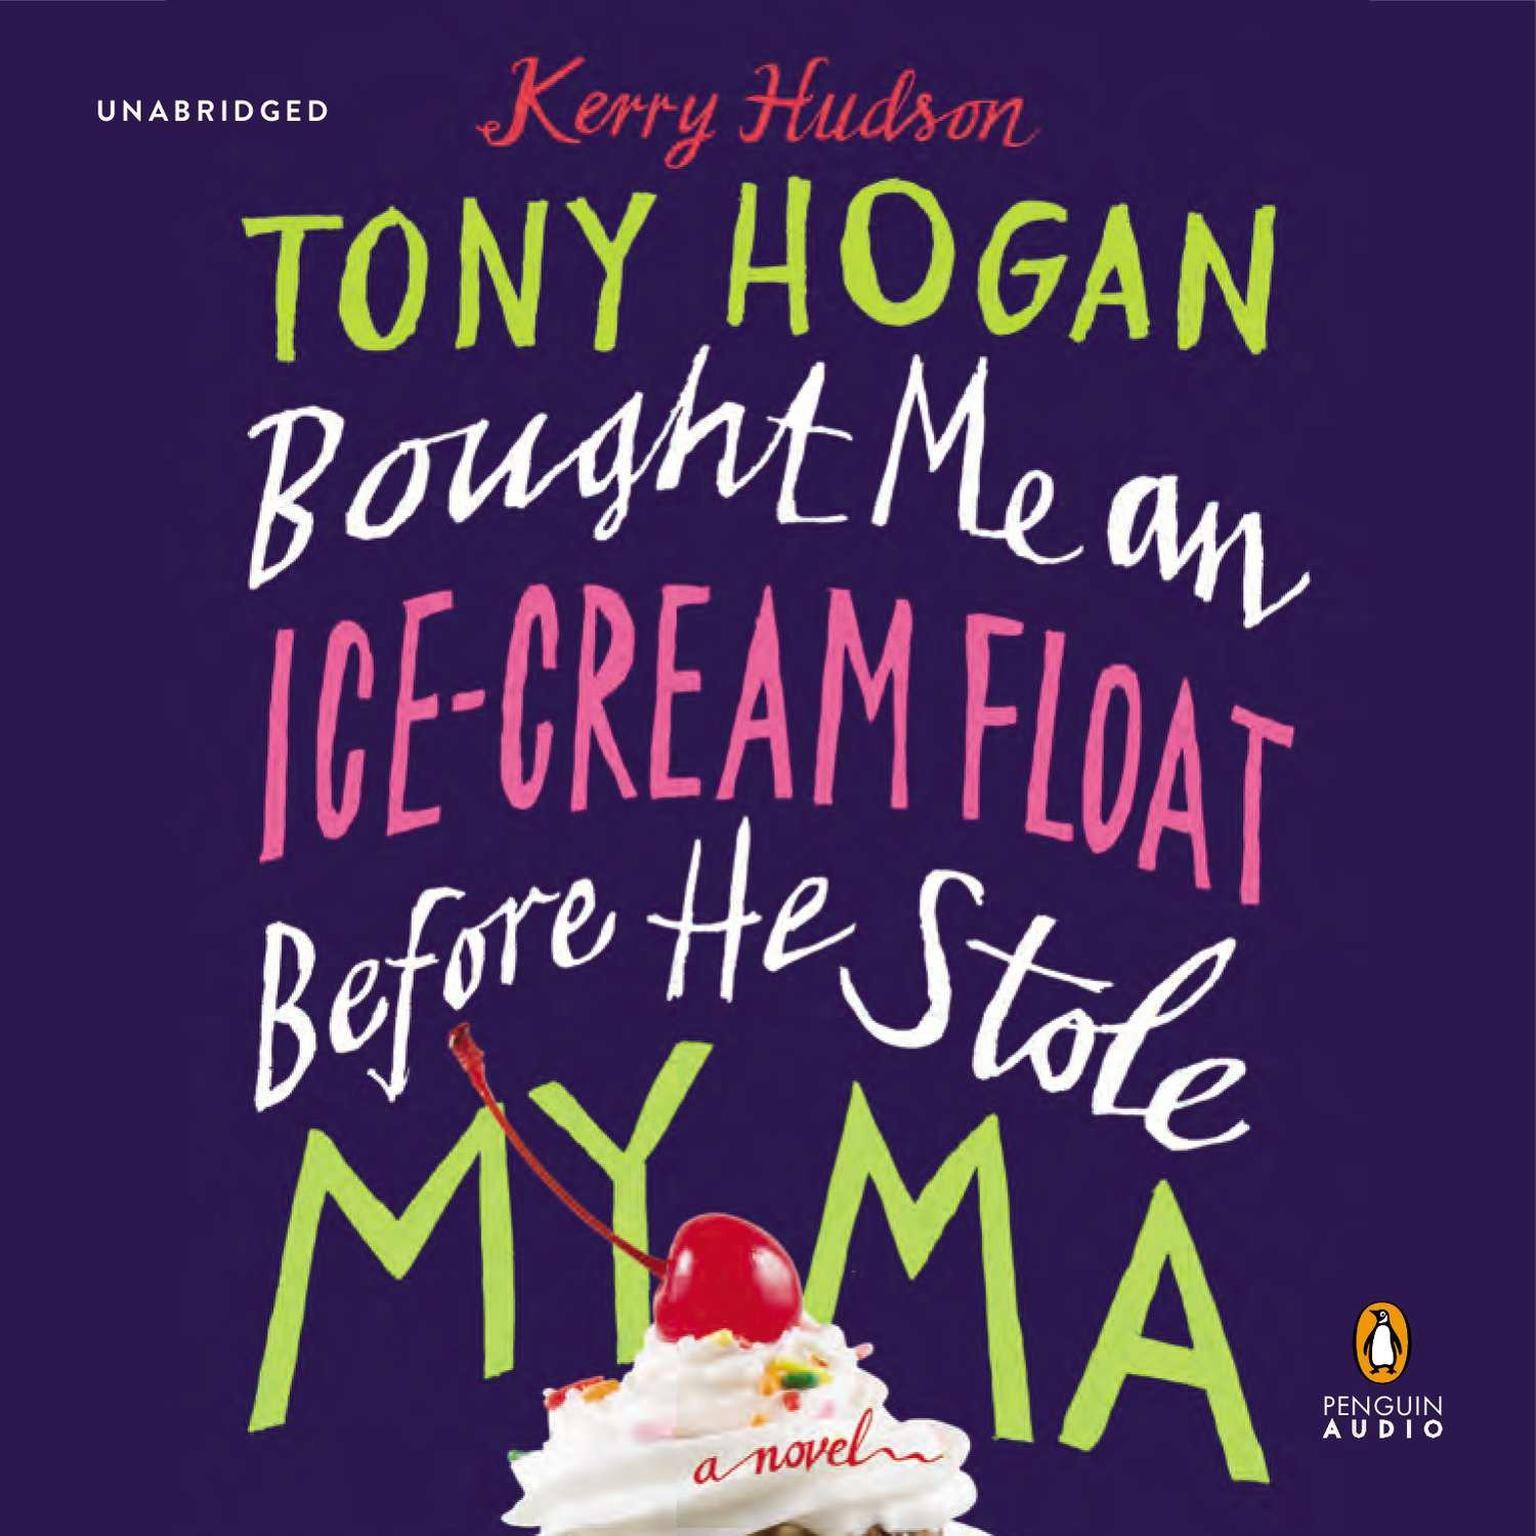 Tony Hogan Bought Me an Ice-Cream Float Before He Stole My Ma: A Novel Audiobook, by Kerry Hudson